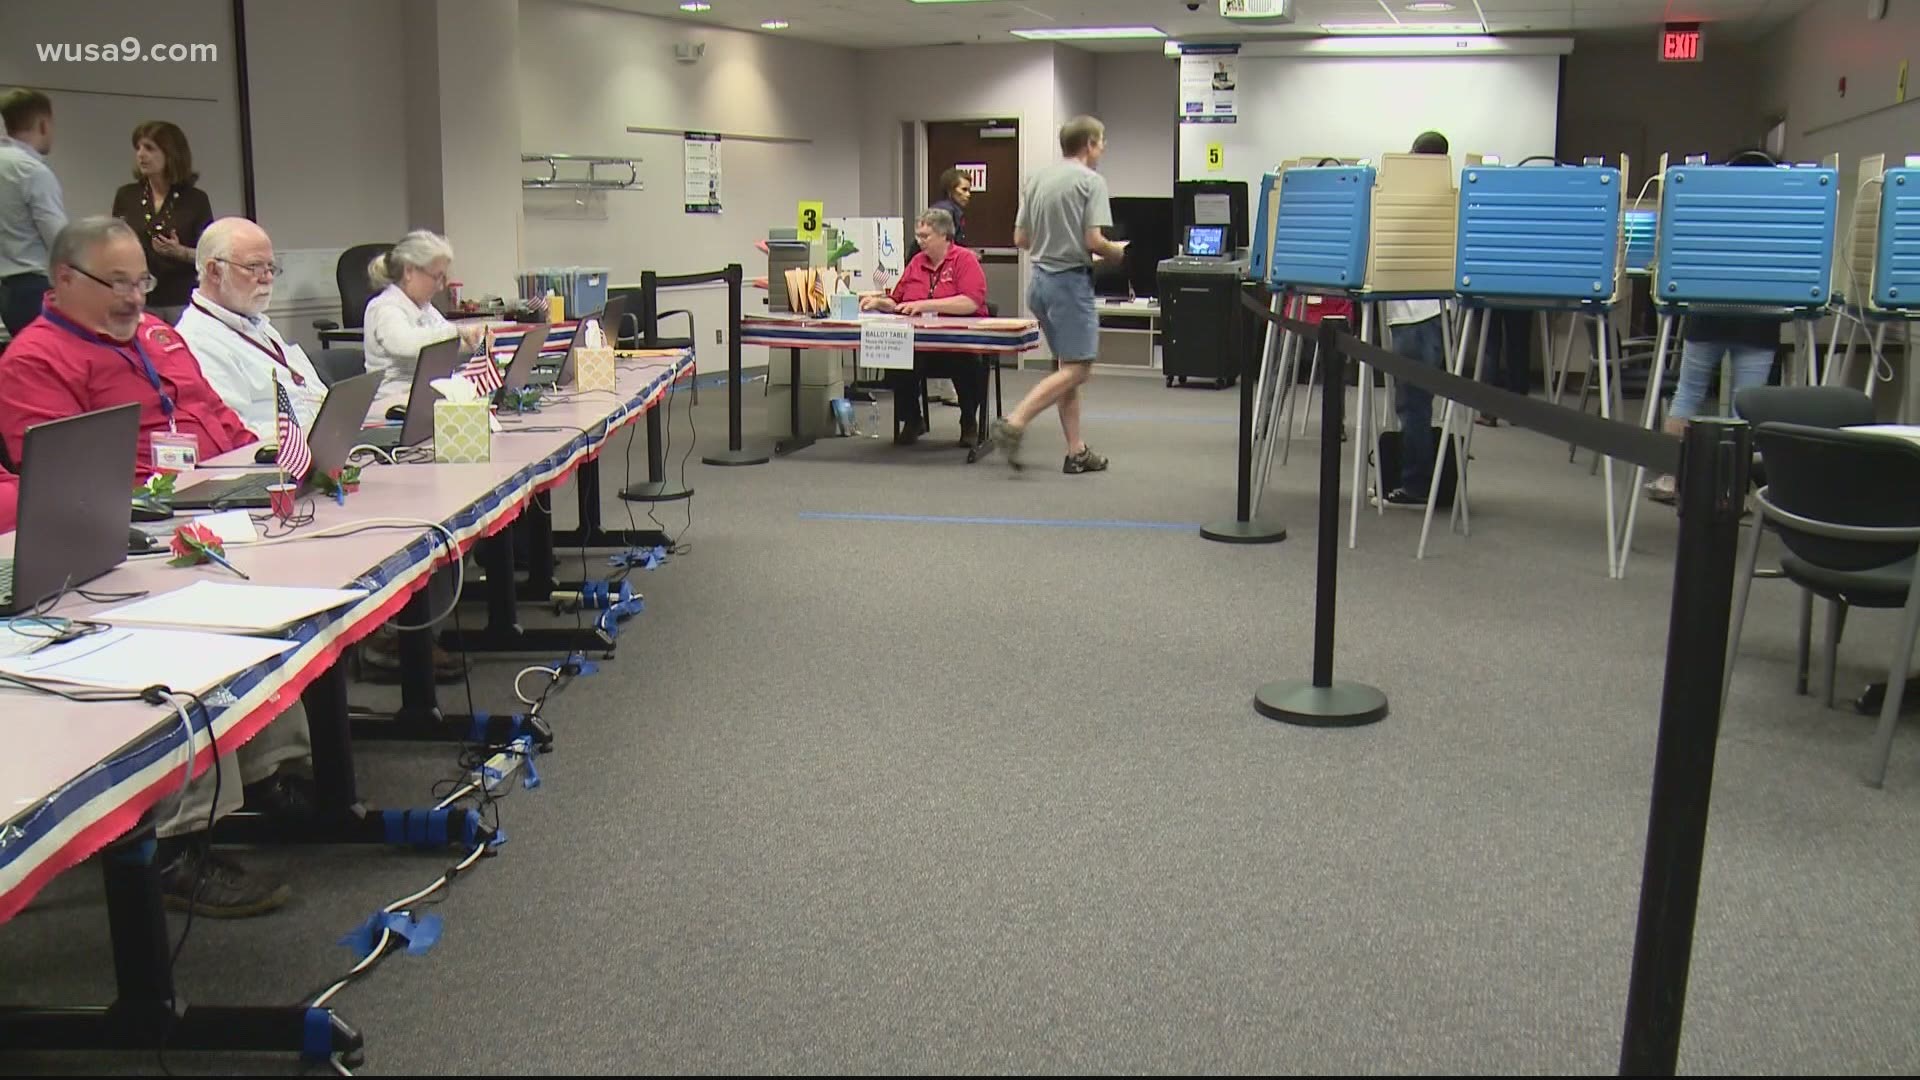 32 early voting centers will be open throughout the District starting Tuesday at 8:30 a.m.